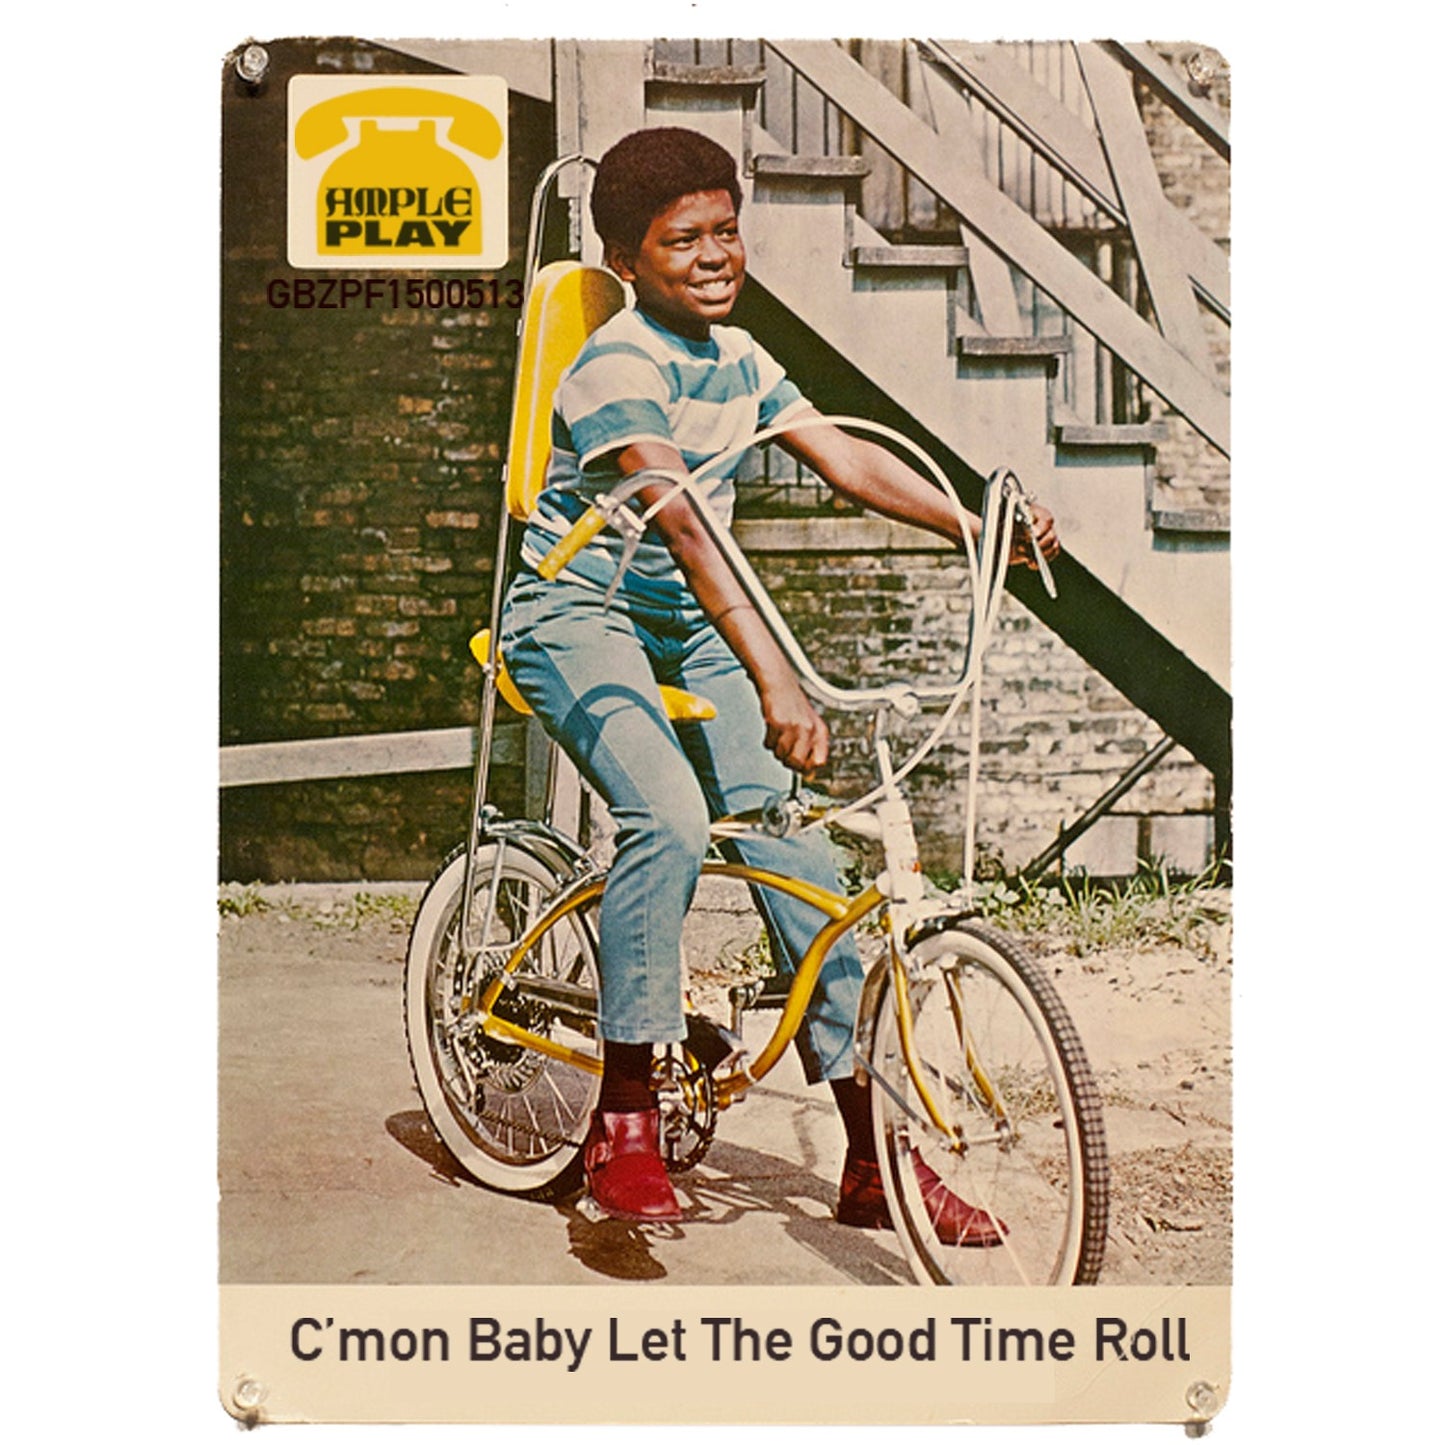 Cornershop 'Let The Good Time Roll' MP3